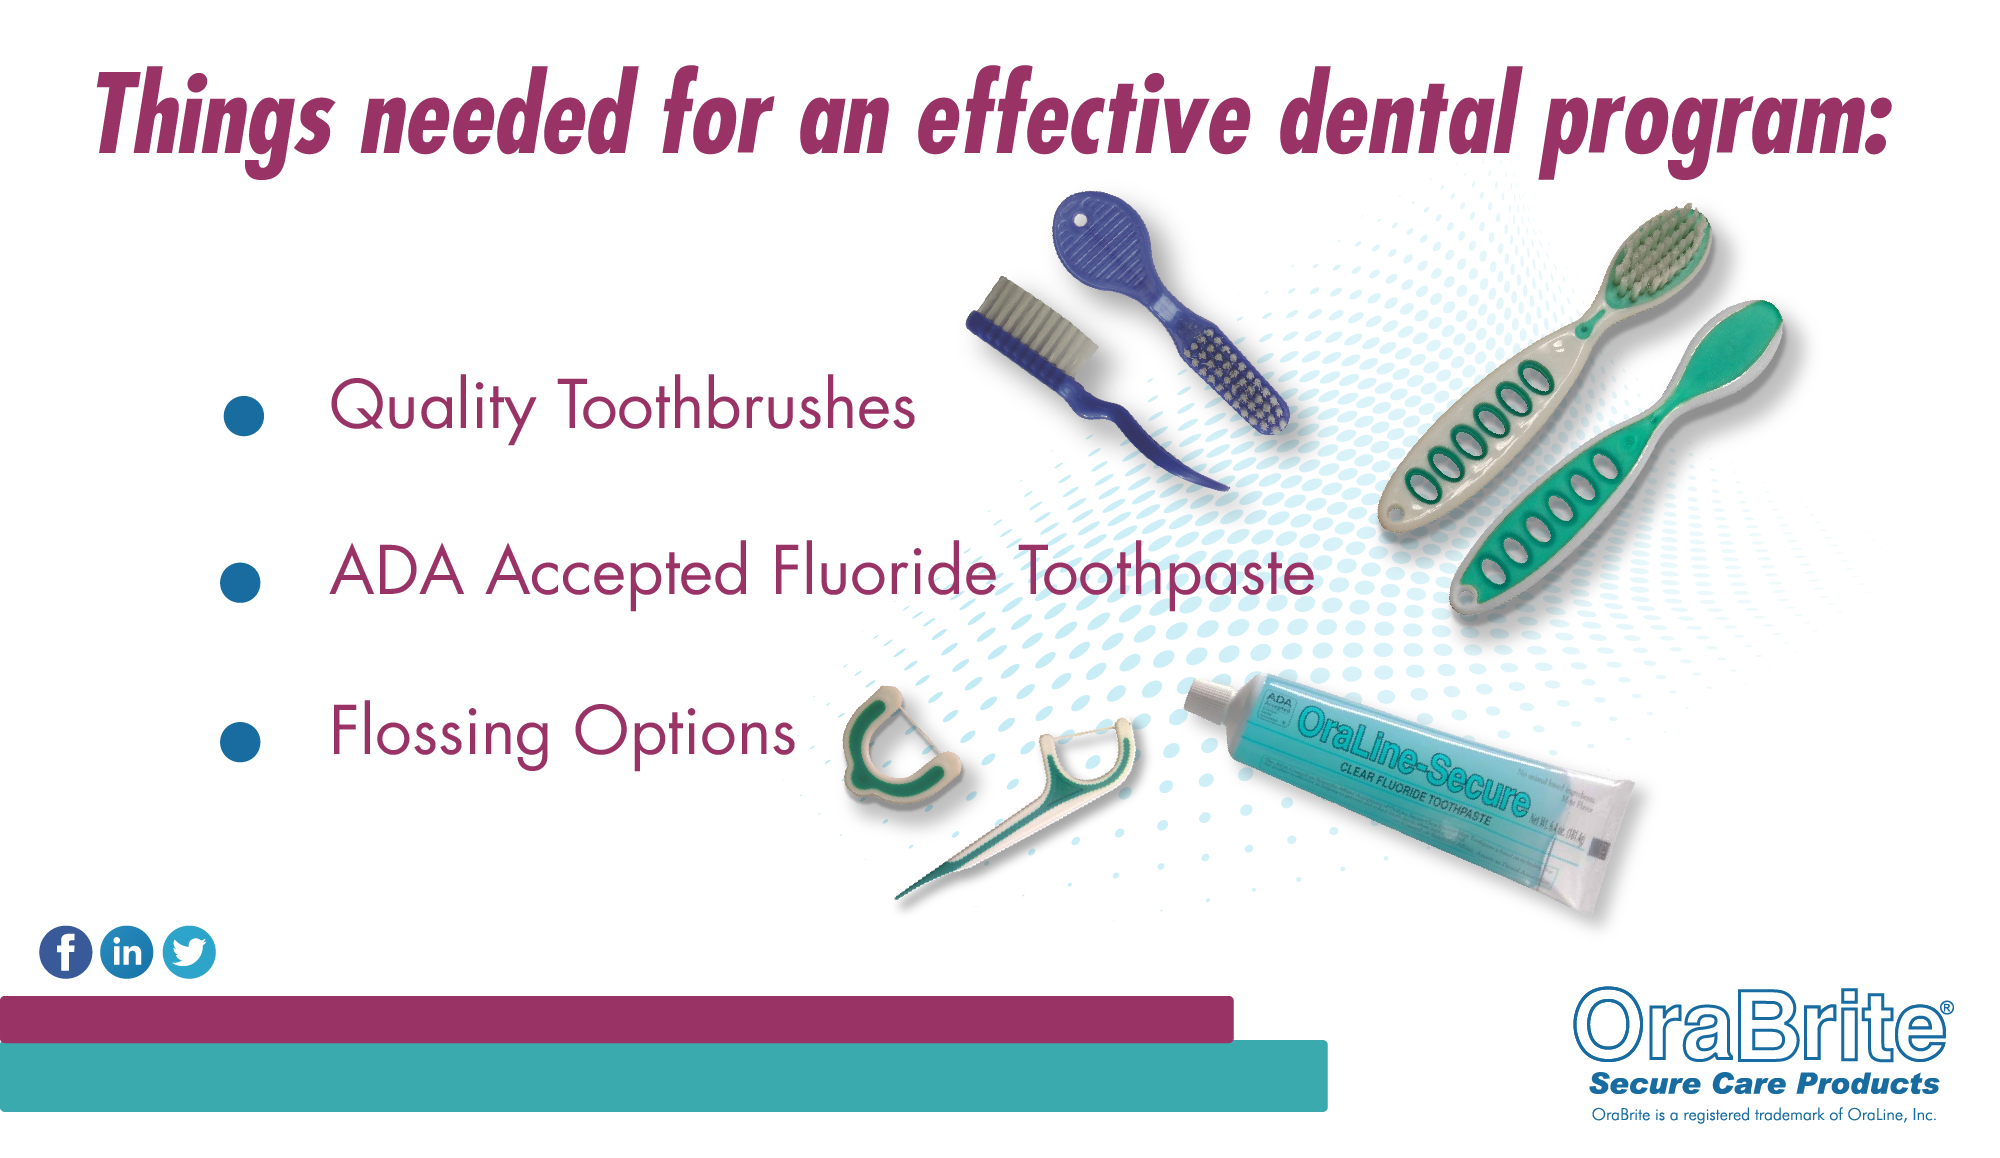 Things needed for an effective dental program